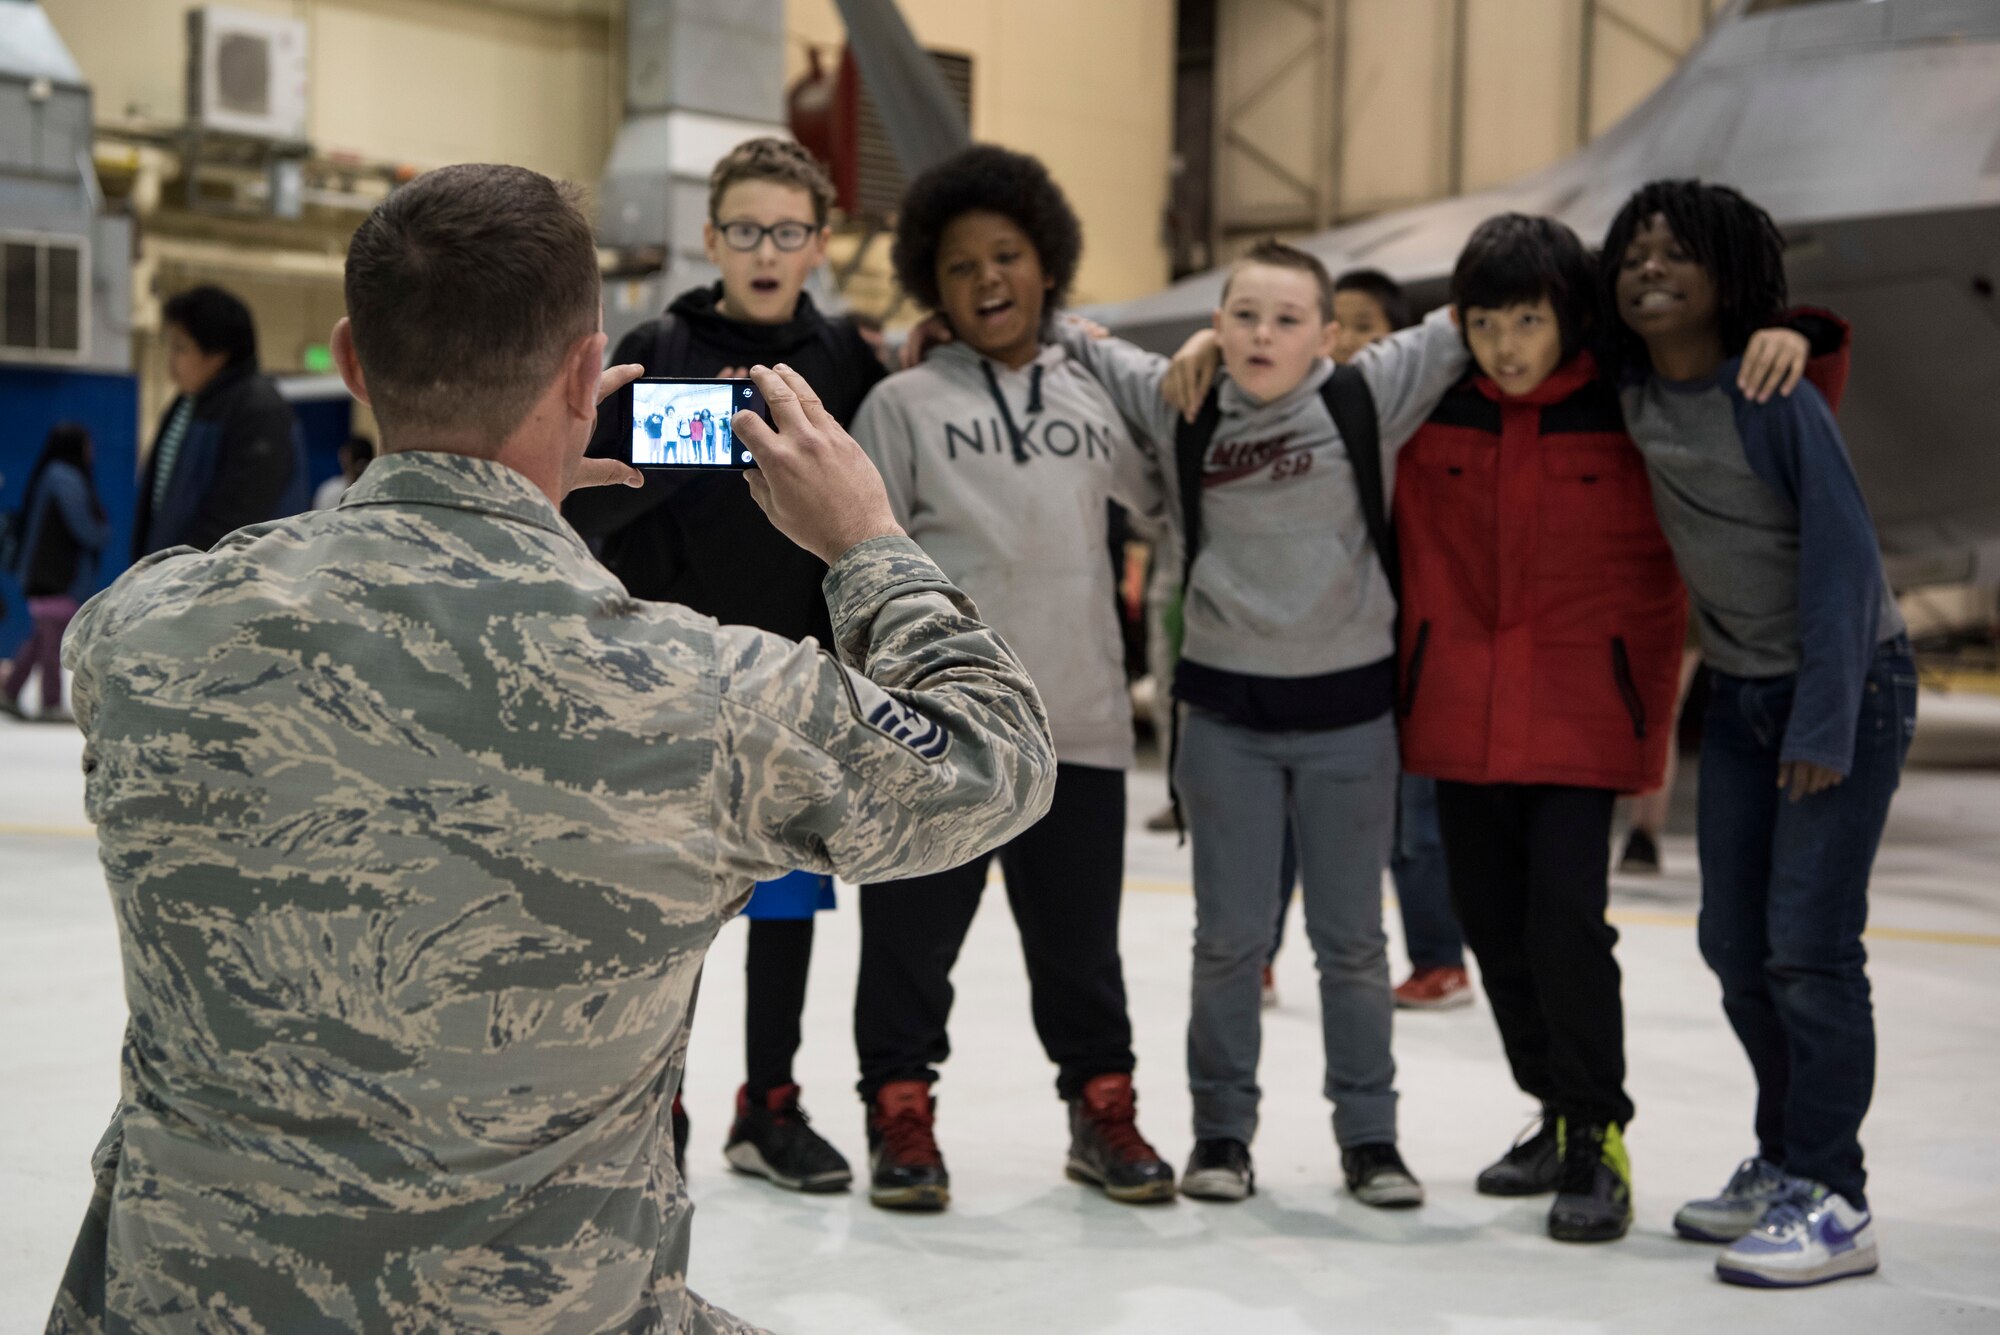 Air Force Master Sgt. Jamie Walker, 3rd Maintenance Squadron assistant first sergeant, takes a photo of several 5th-grade students from Wonder Park and Mountain View elementary schools at the “Day in the Life of Airmen” tour on Joint Base Elmendorf-Richardson, Alaska, May 4, 2018. The tour provided an interactive educational experience for the students while allowing service members the opportunity to serve the local community.